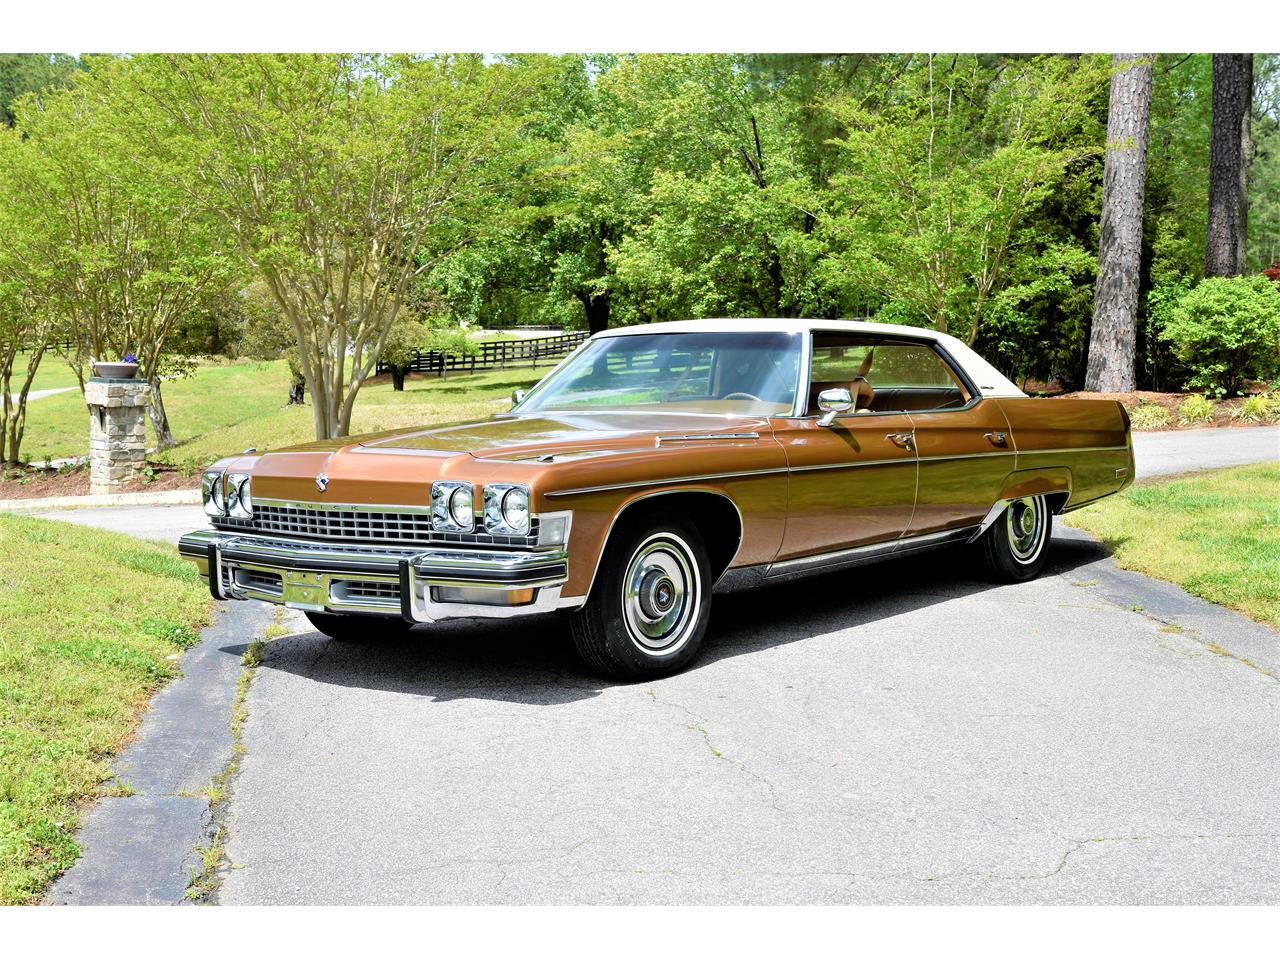 1971 1976 Buick Electra 225 10